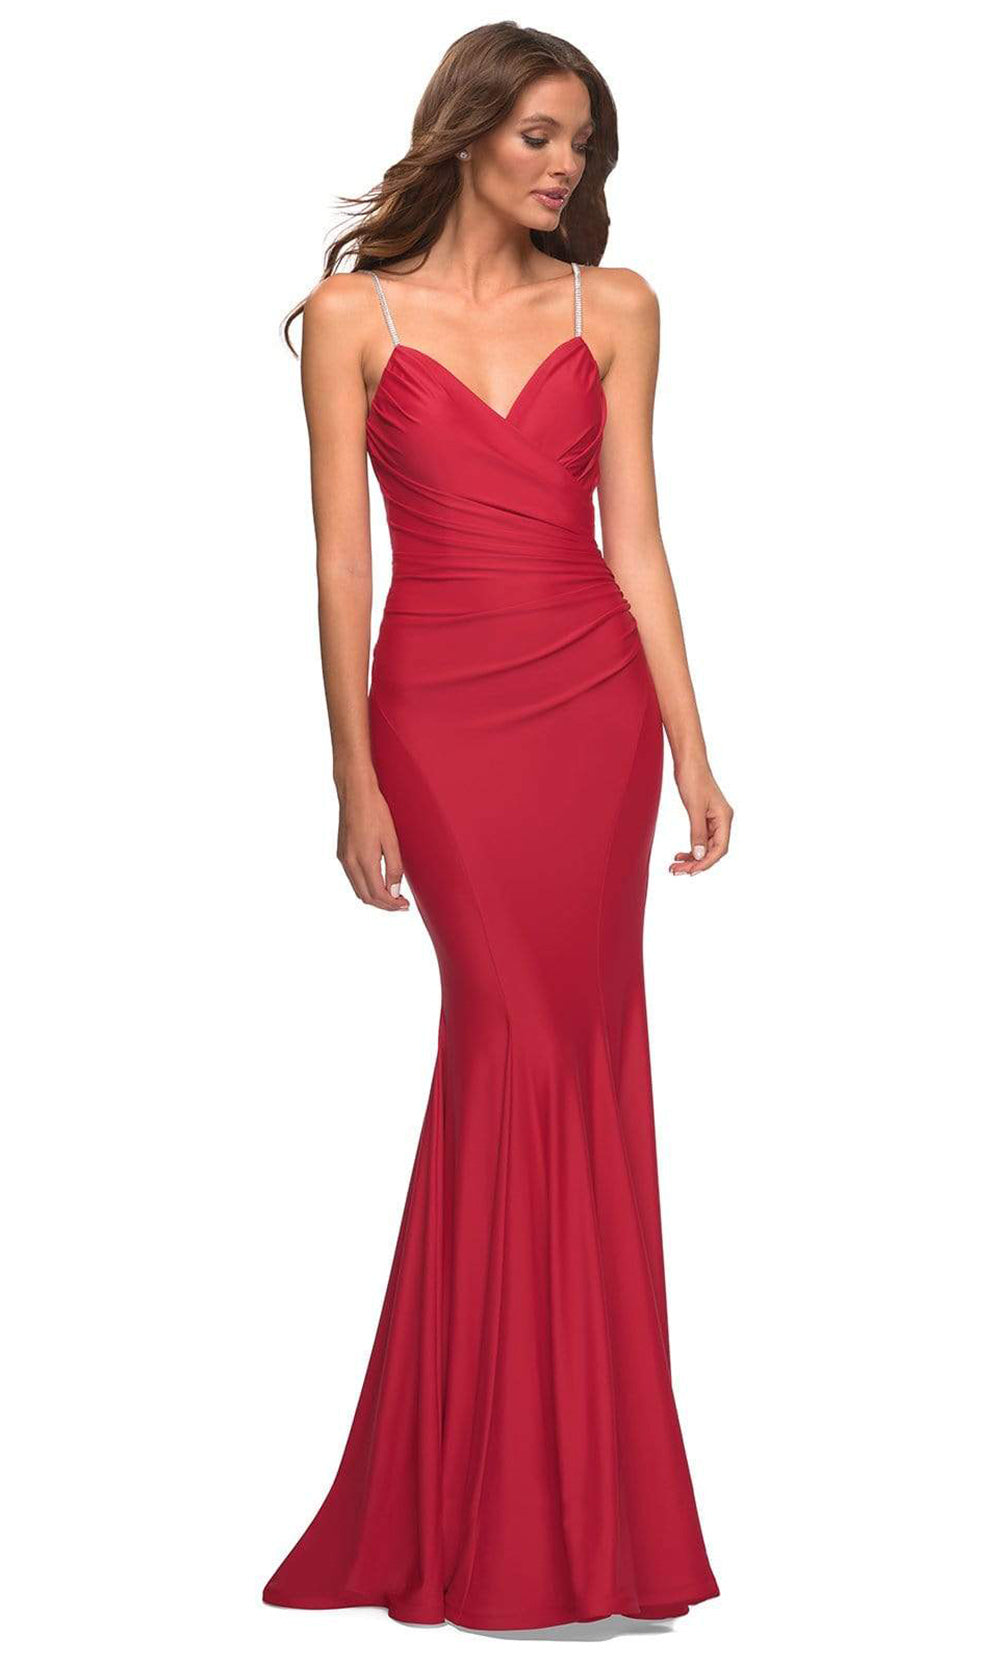 La Femme - 30712 Adorned Strap Mermaid Gown In Red